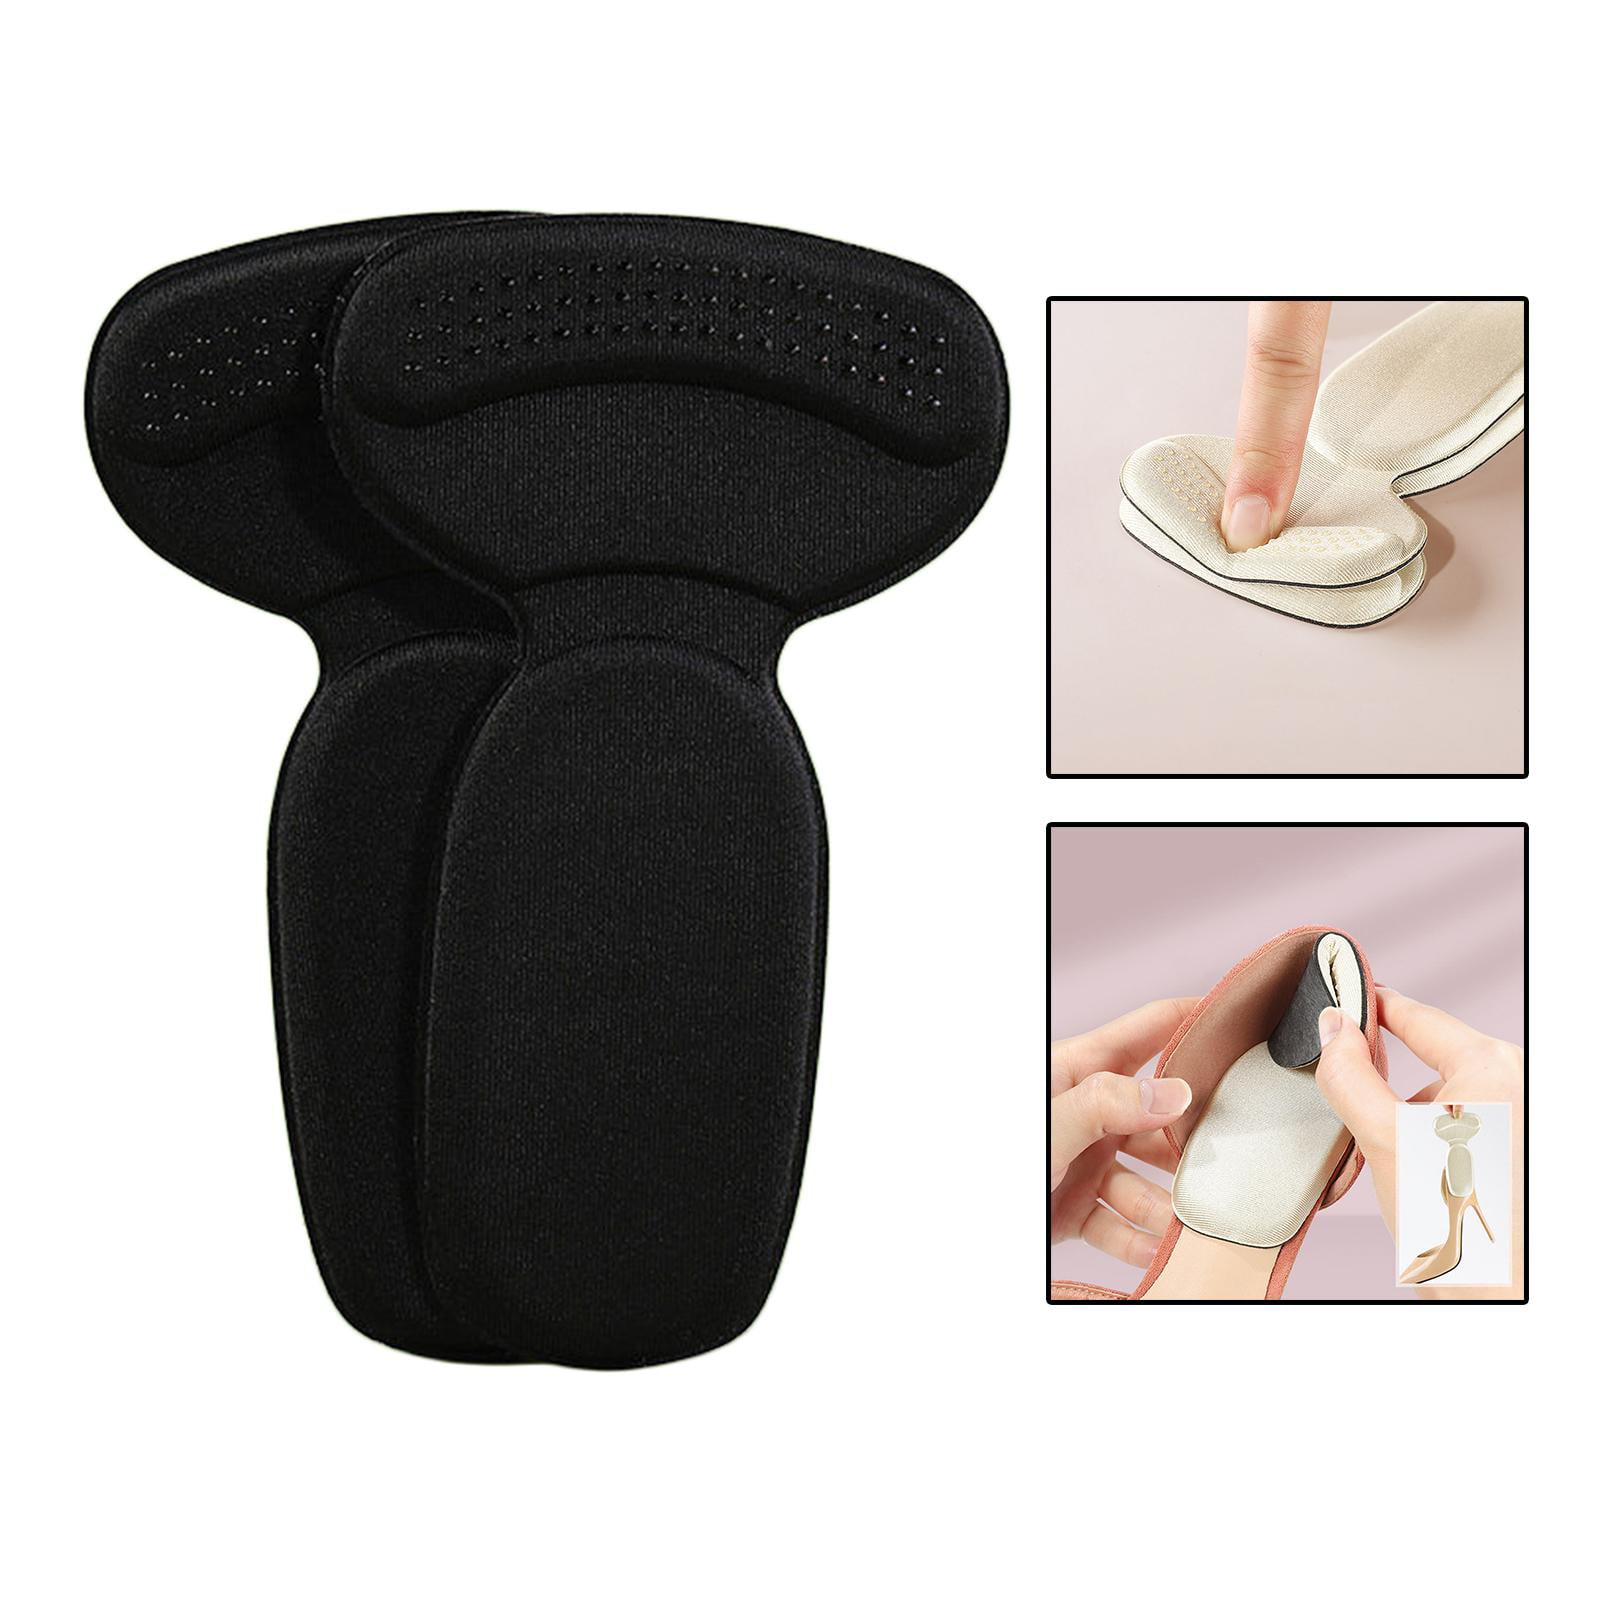 Pjtewawe Easter Foot Masks Front Foot Pad Heel Grip Suitable For Loose Shoes  High Heel Pad Pad Reusable Insole Insole And Pad To Heel Blisters - Walmart .com